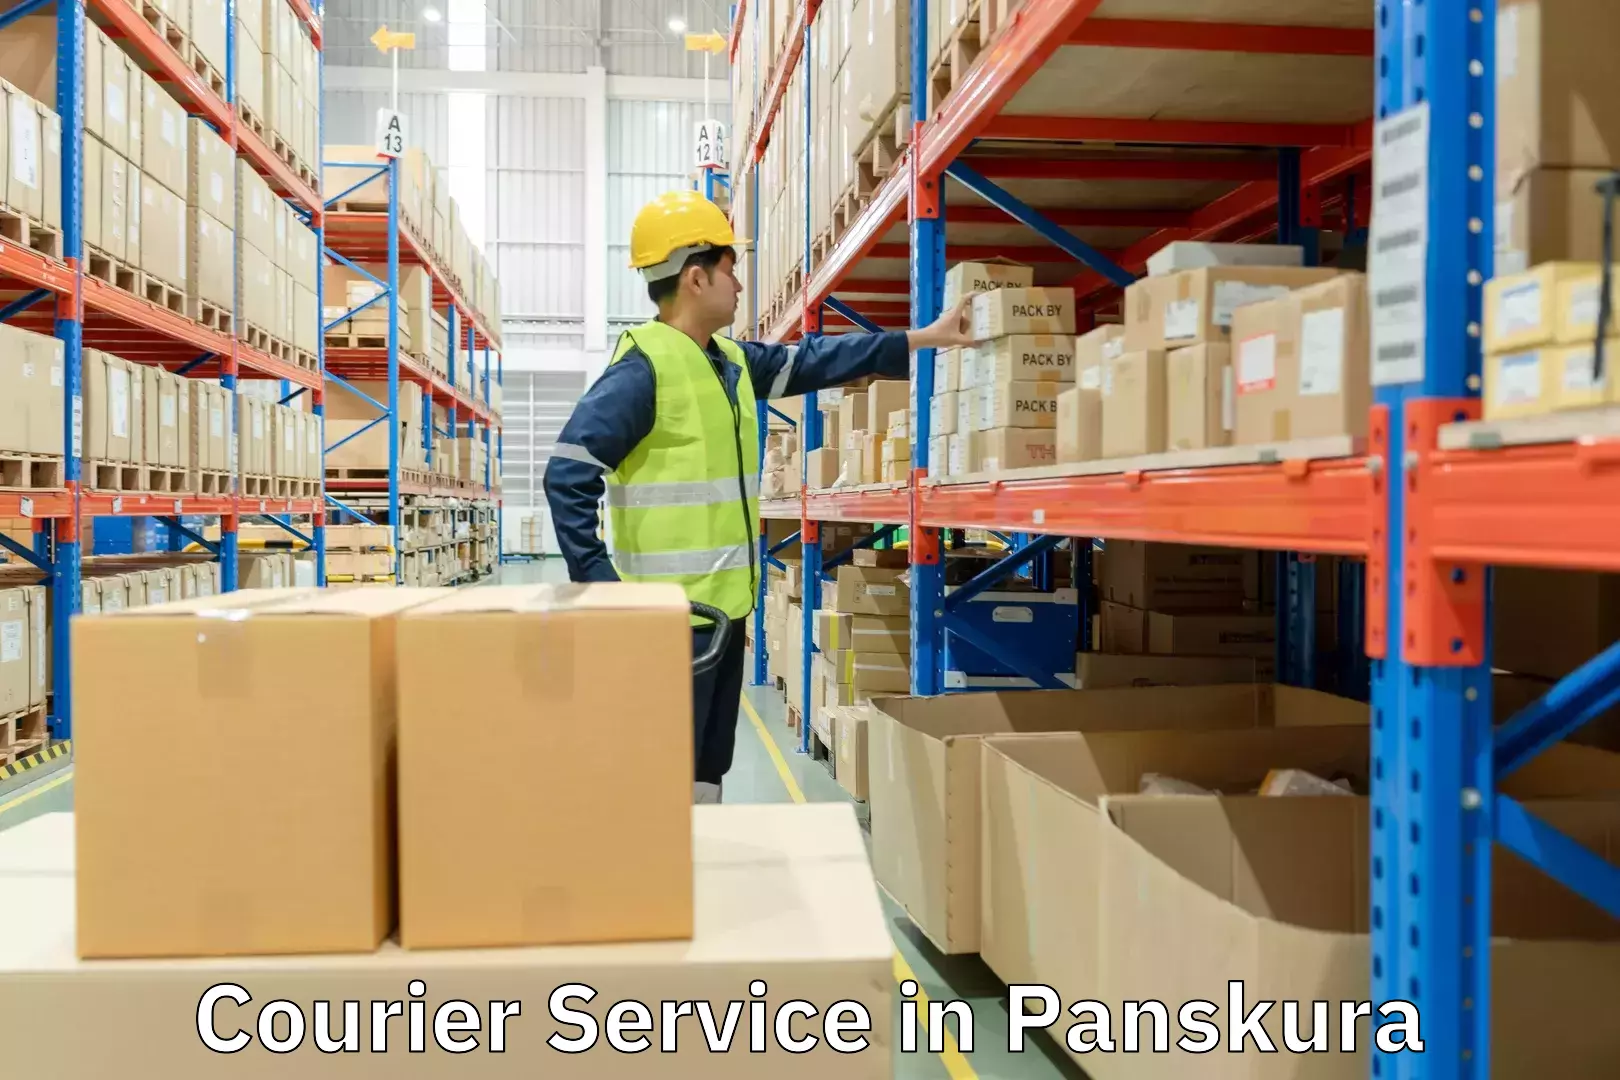 Sustainable shipping practices in Panskura